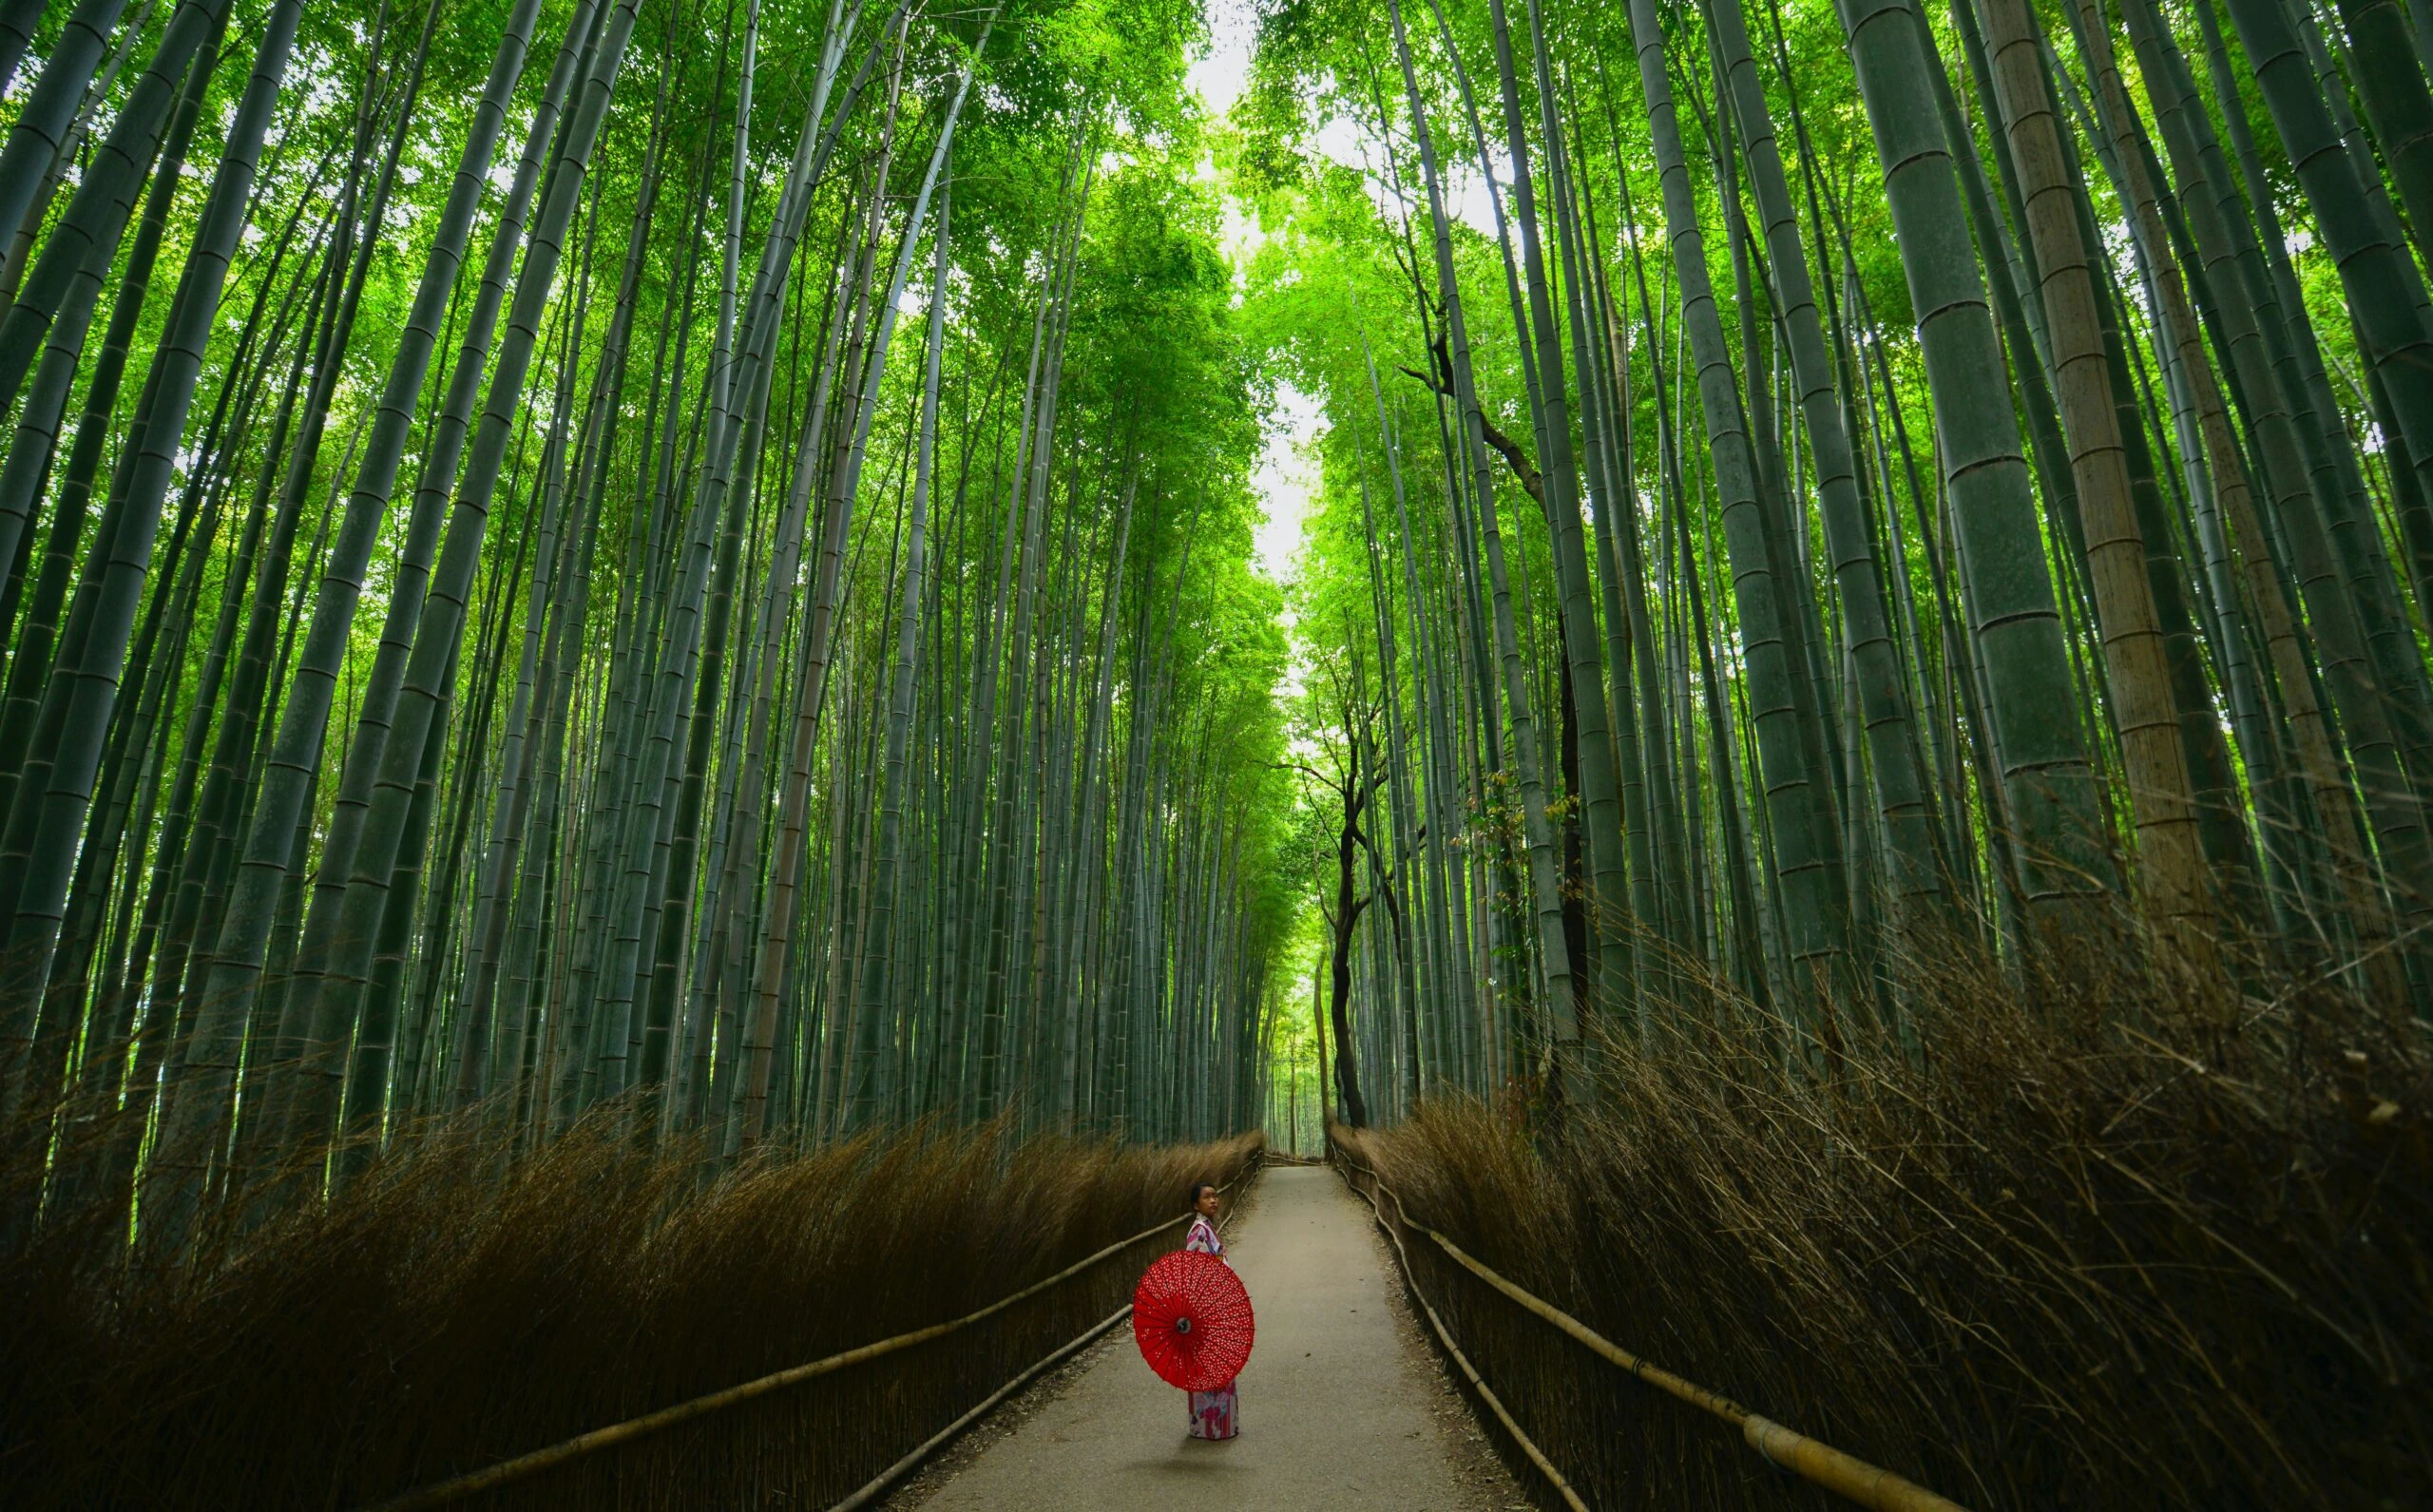 walter-mario-stein-Women walking narrow path in bamboo forest tall bamboo on either side-unsplash